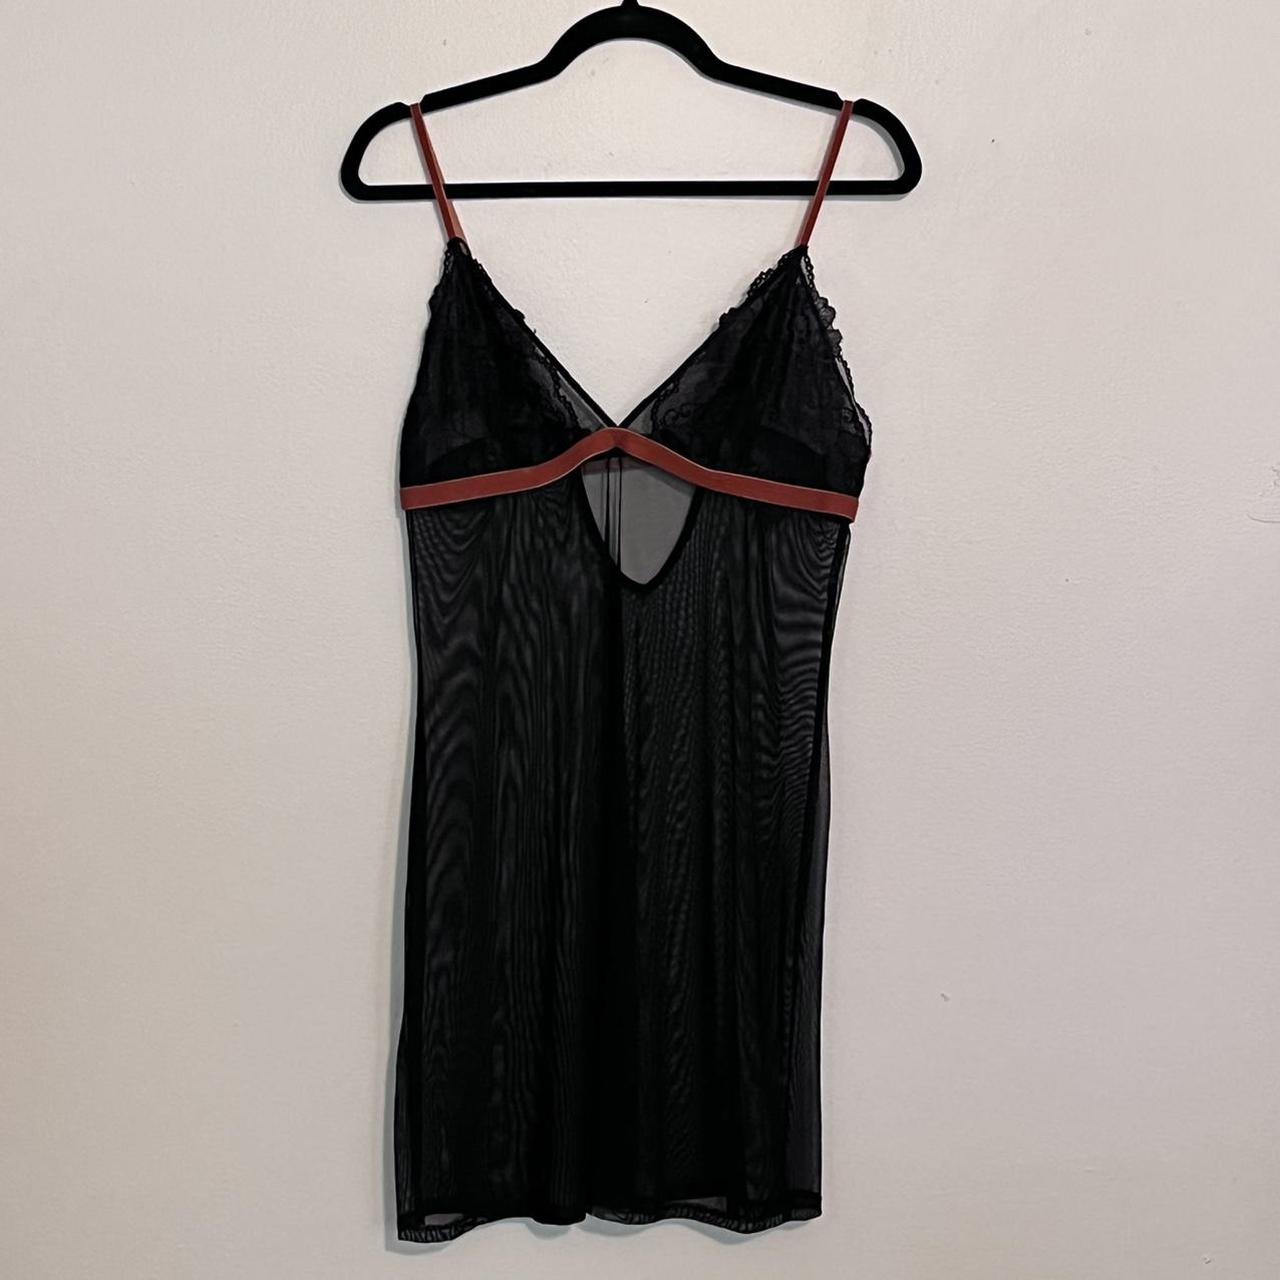 Product Image 1 - Lace Teddy lingerie dress top